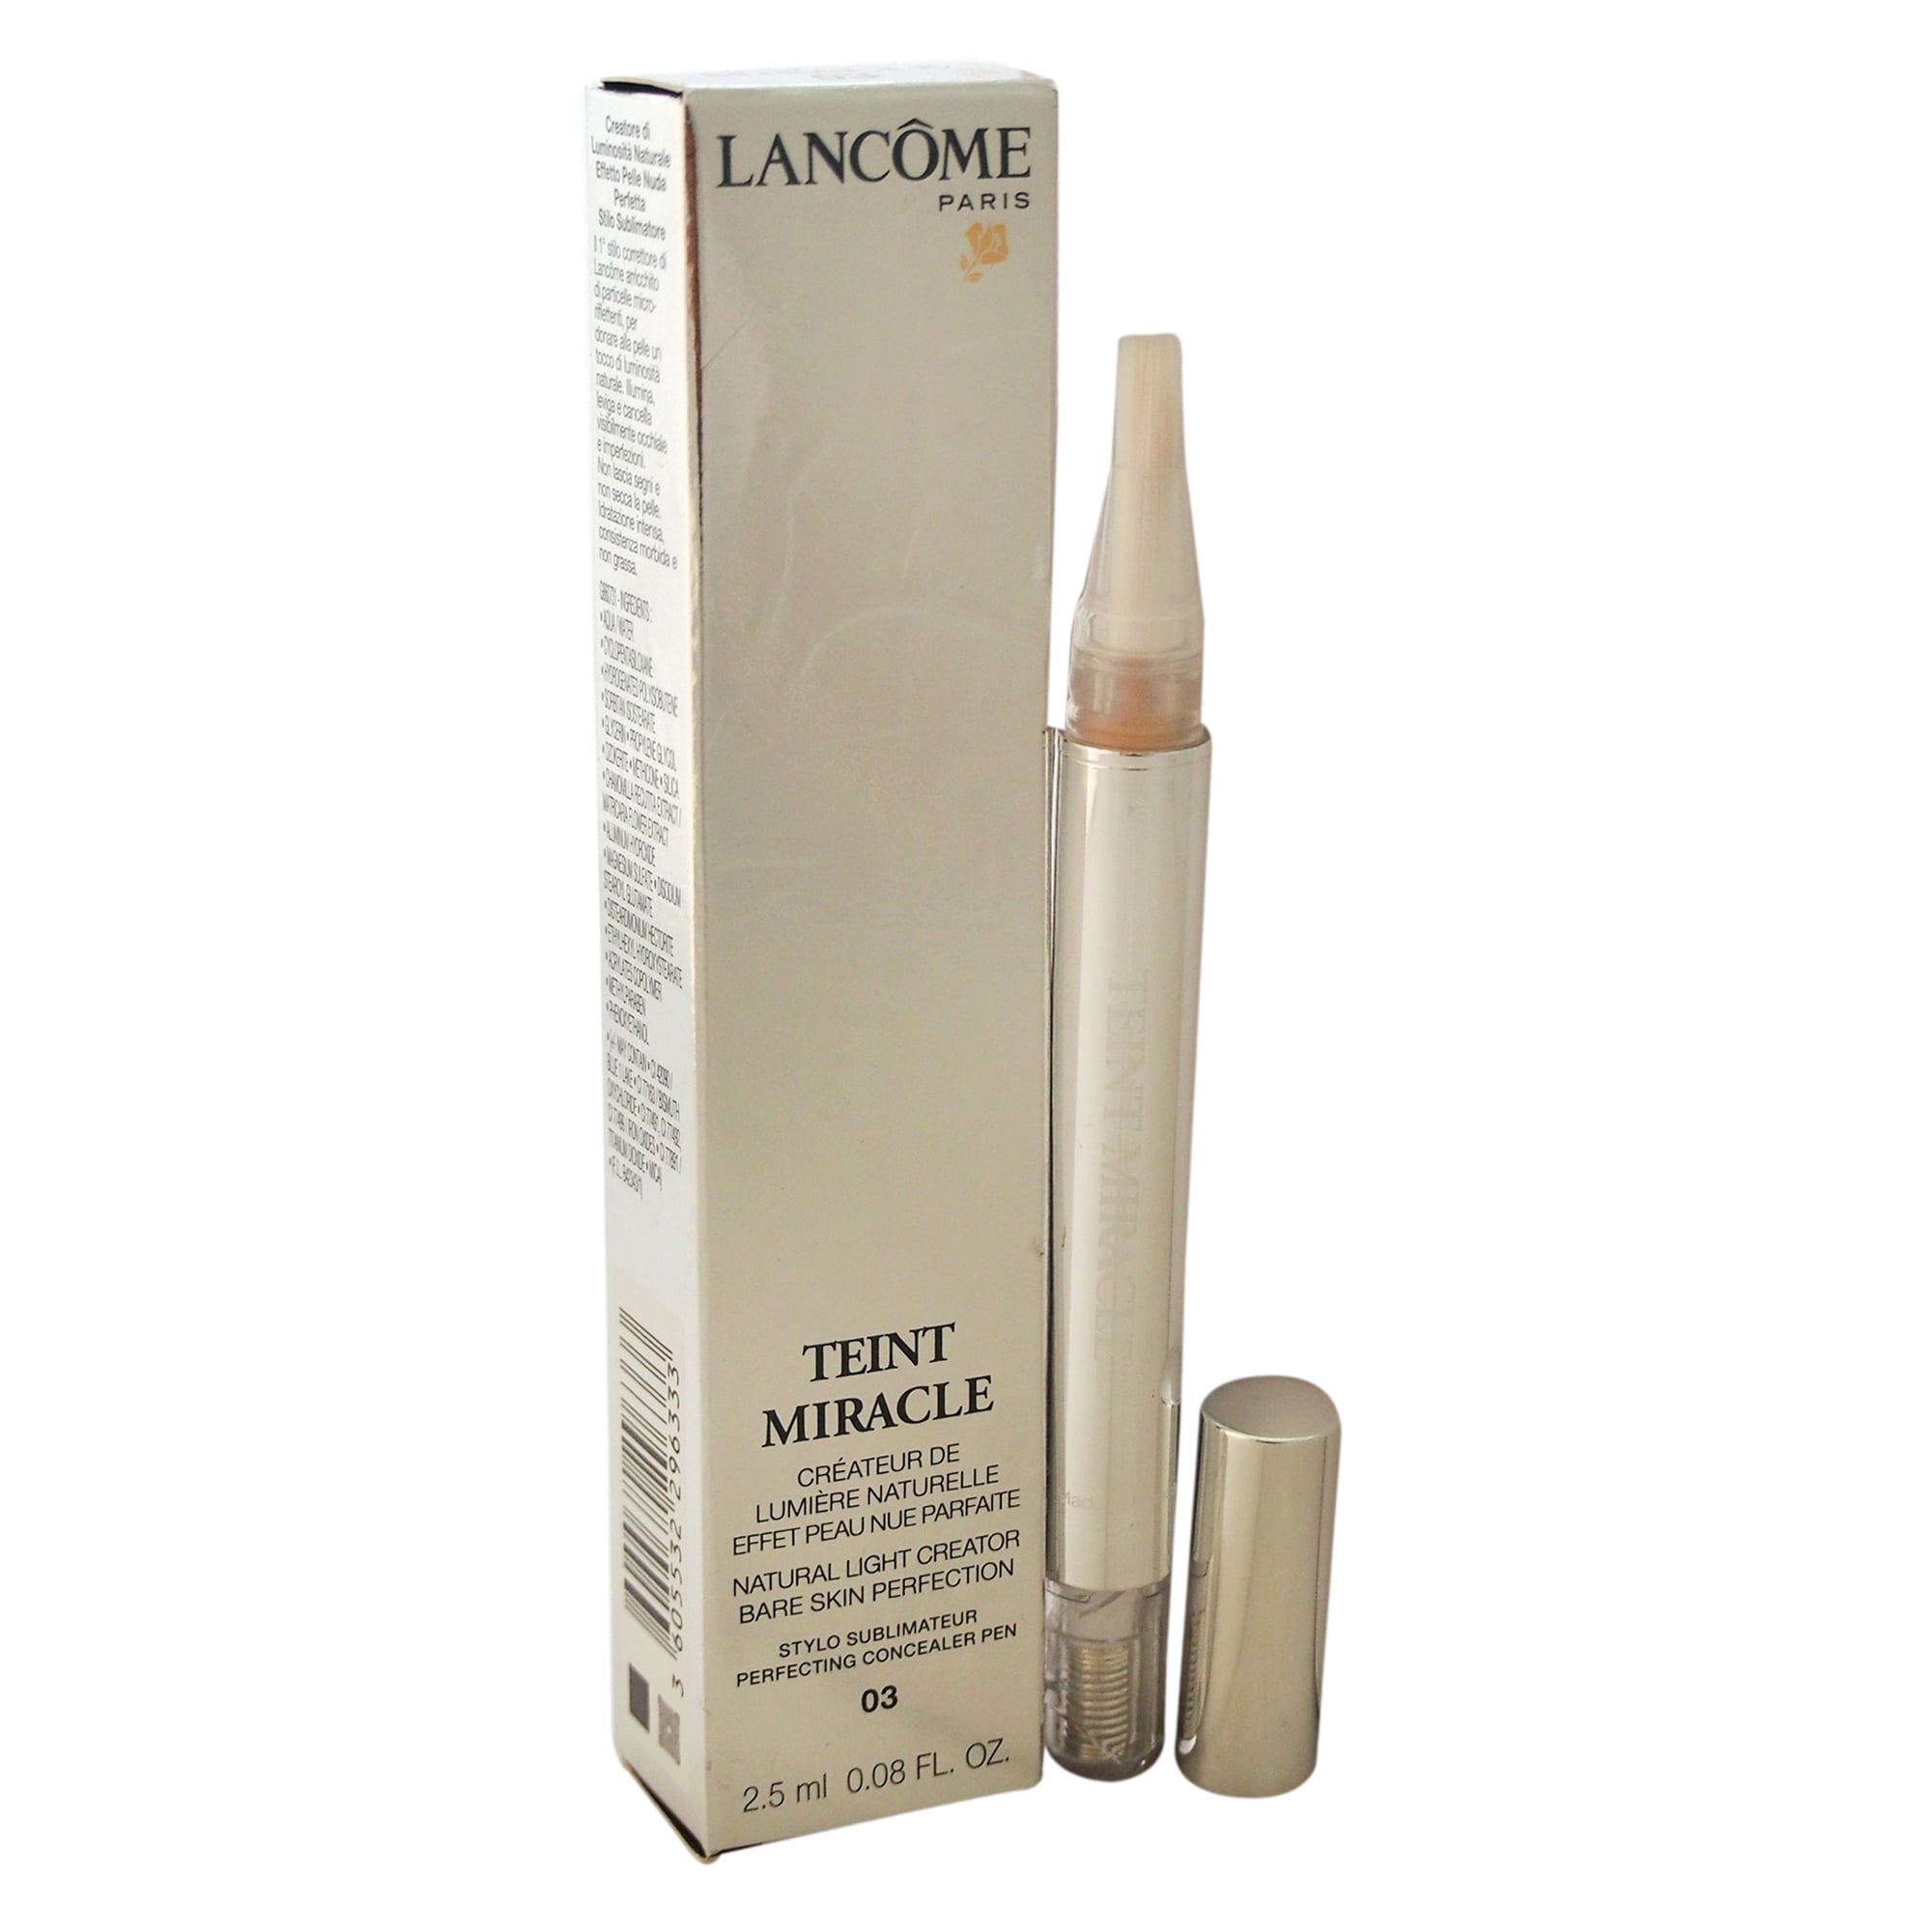 teenagere grundigt tvivl Teint Miracle Natural Light Creator Bare Skin Perfection - # 03 Beige  Lumiere by Lancome for Women - 0.08 oz Concealer Pen - Walmart.com